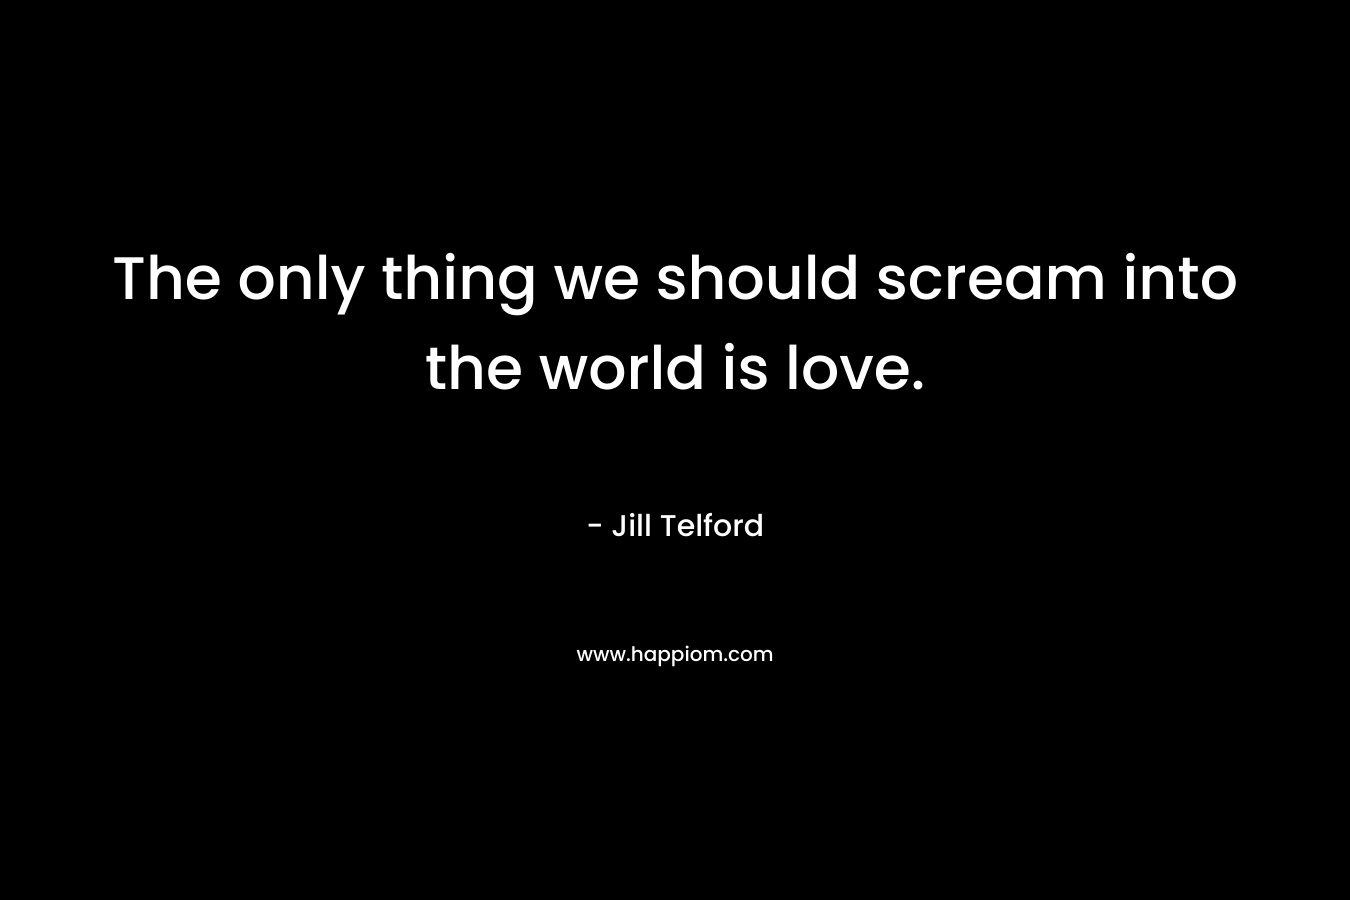 The only thing we should scream into the world is love.